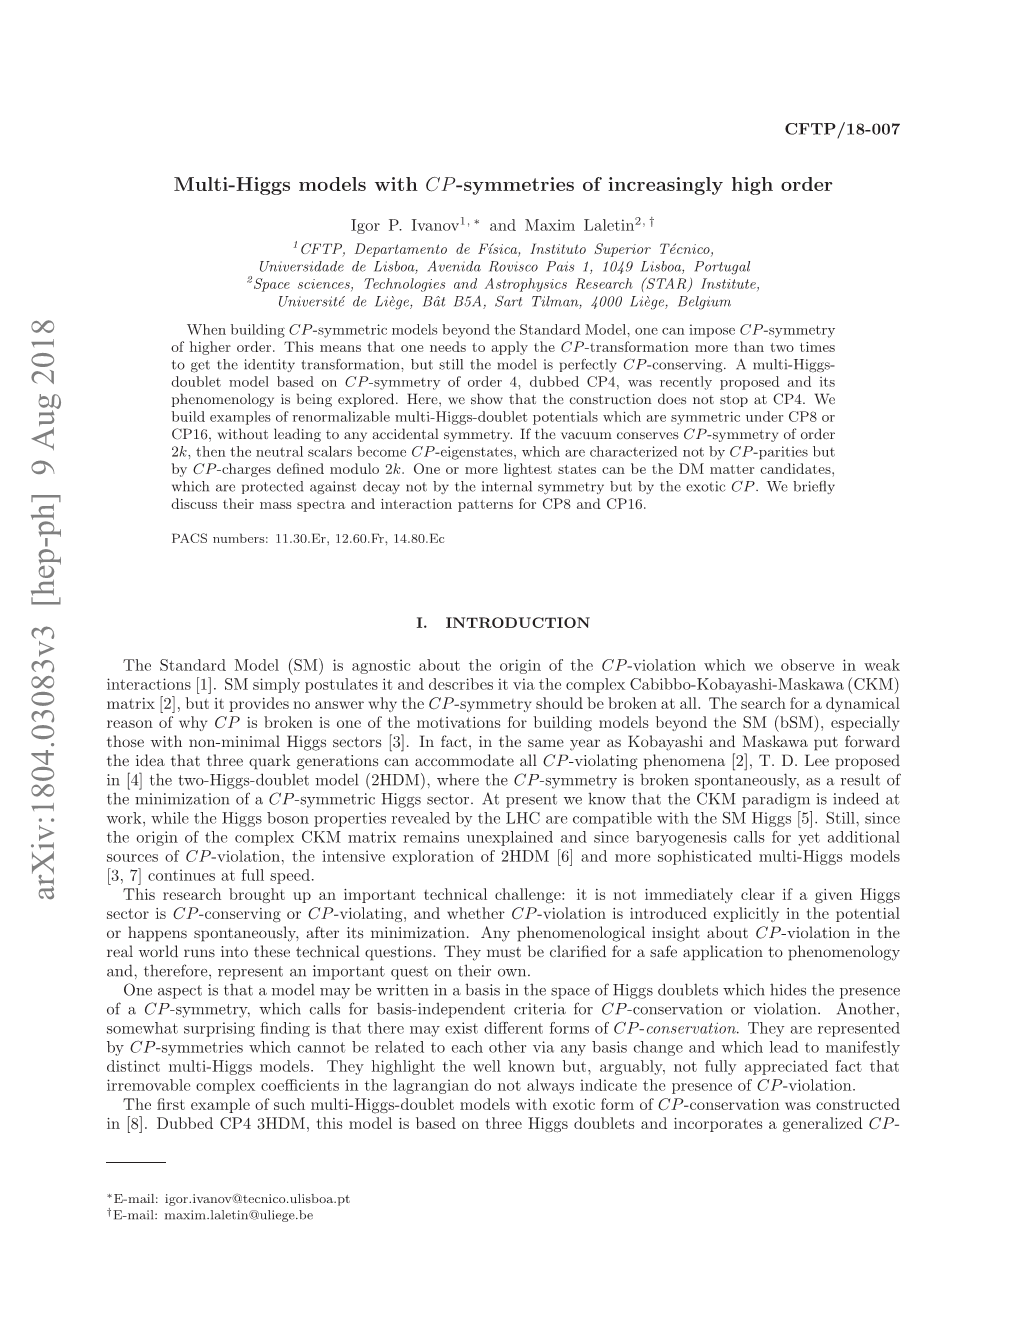 Multi-Higgs Models with CP Symmetries of Increasingly High Order